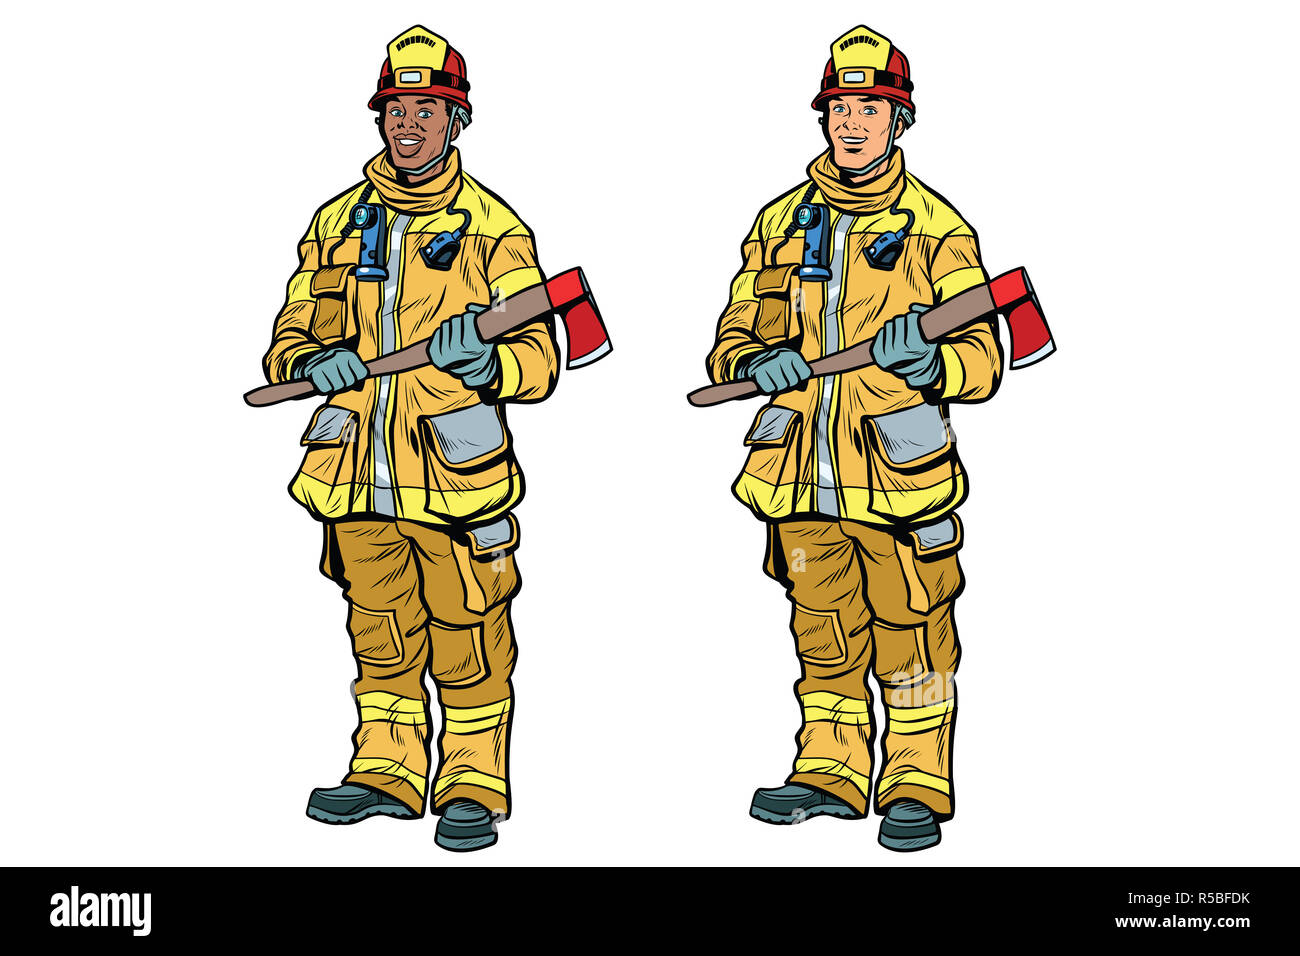 African American and Caucasian firemen in uniform with axes Stock Photo